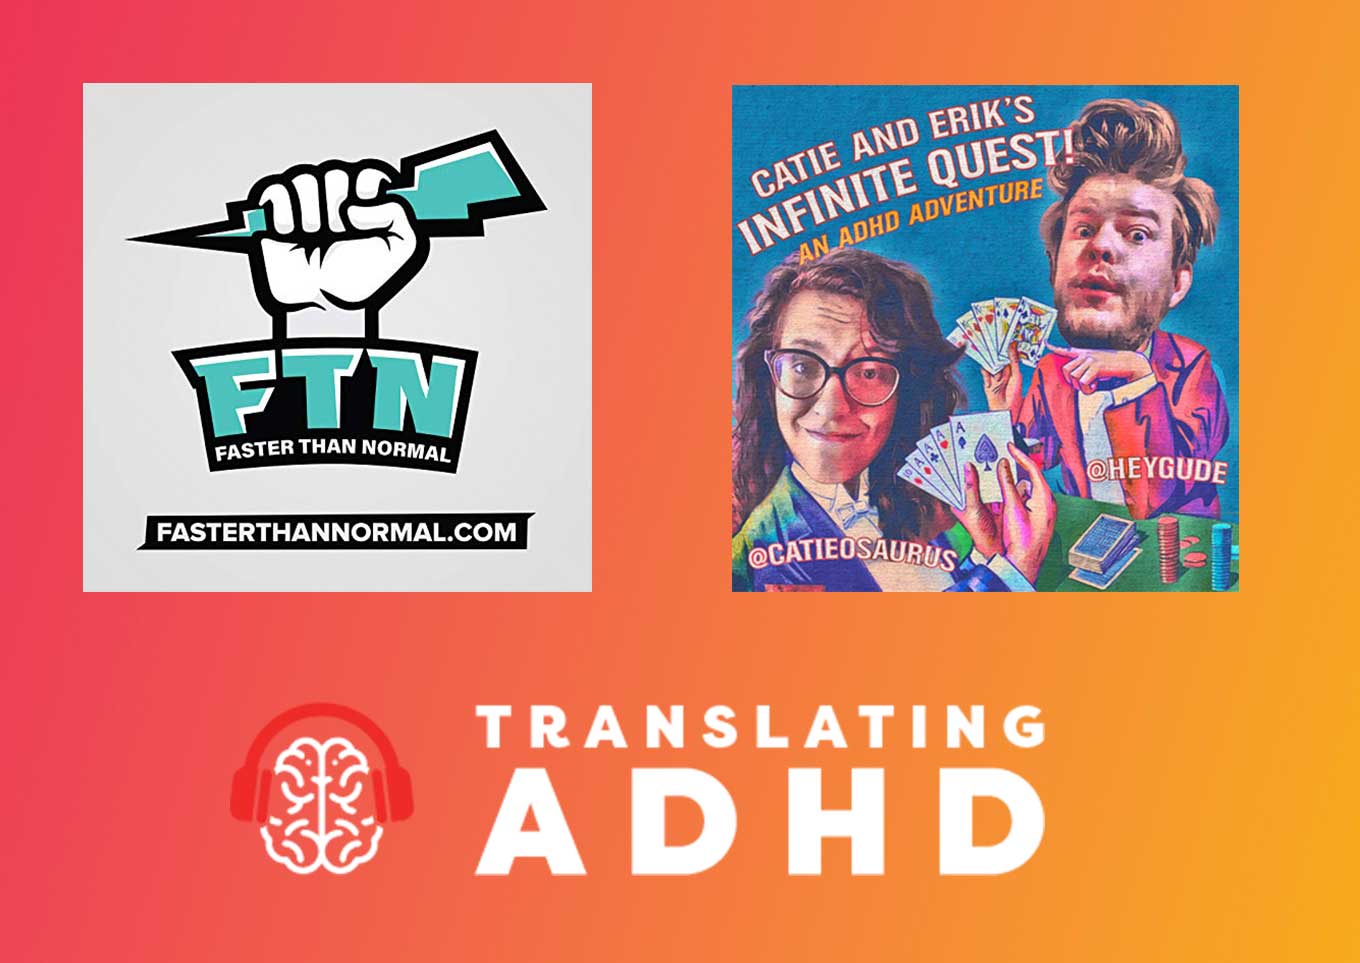 Faster Than Normal Podcast, Catie and Erik's Infinite Quest - An ADHD Adventure, and Translating ADHD Podcast